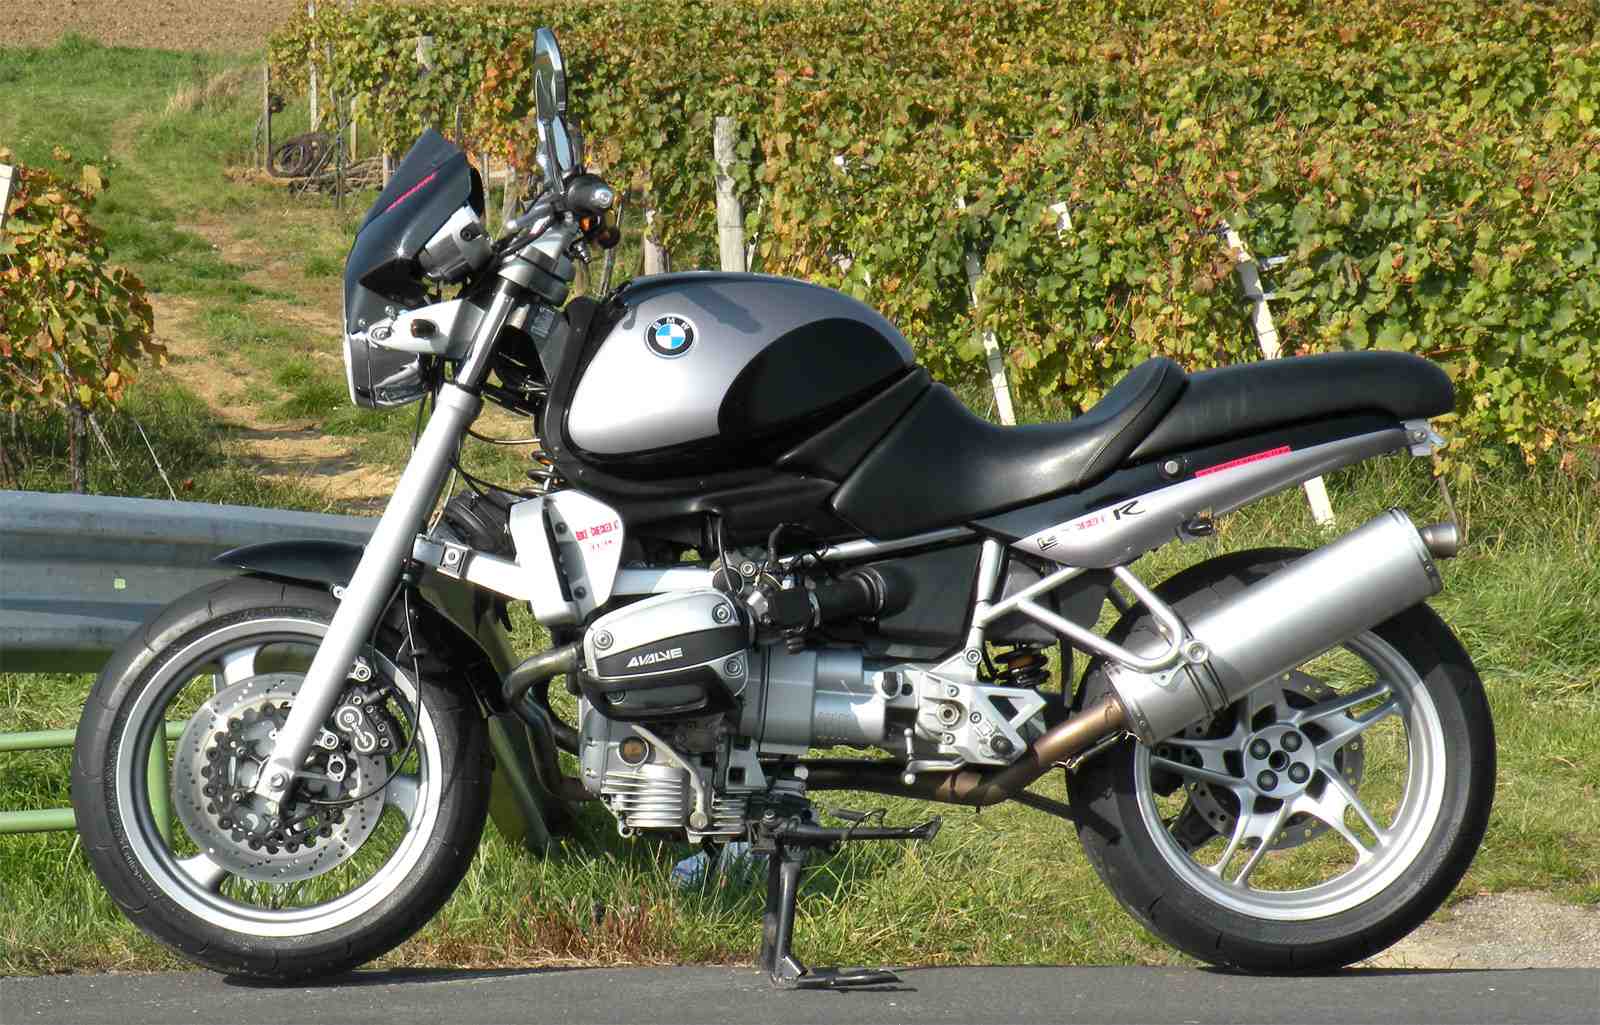 Bmw r1150rt owners manual